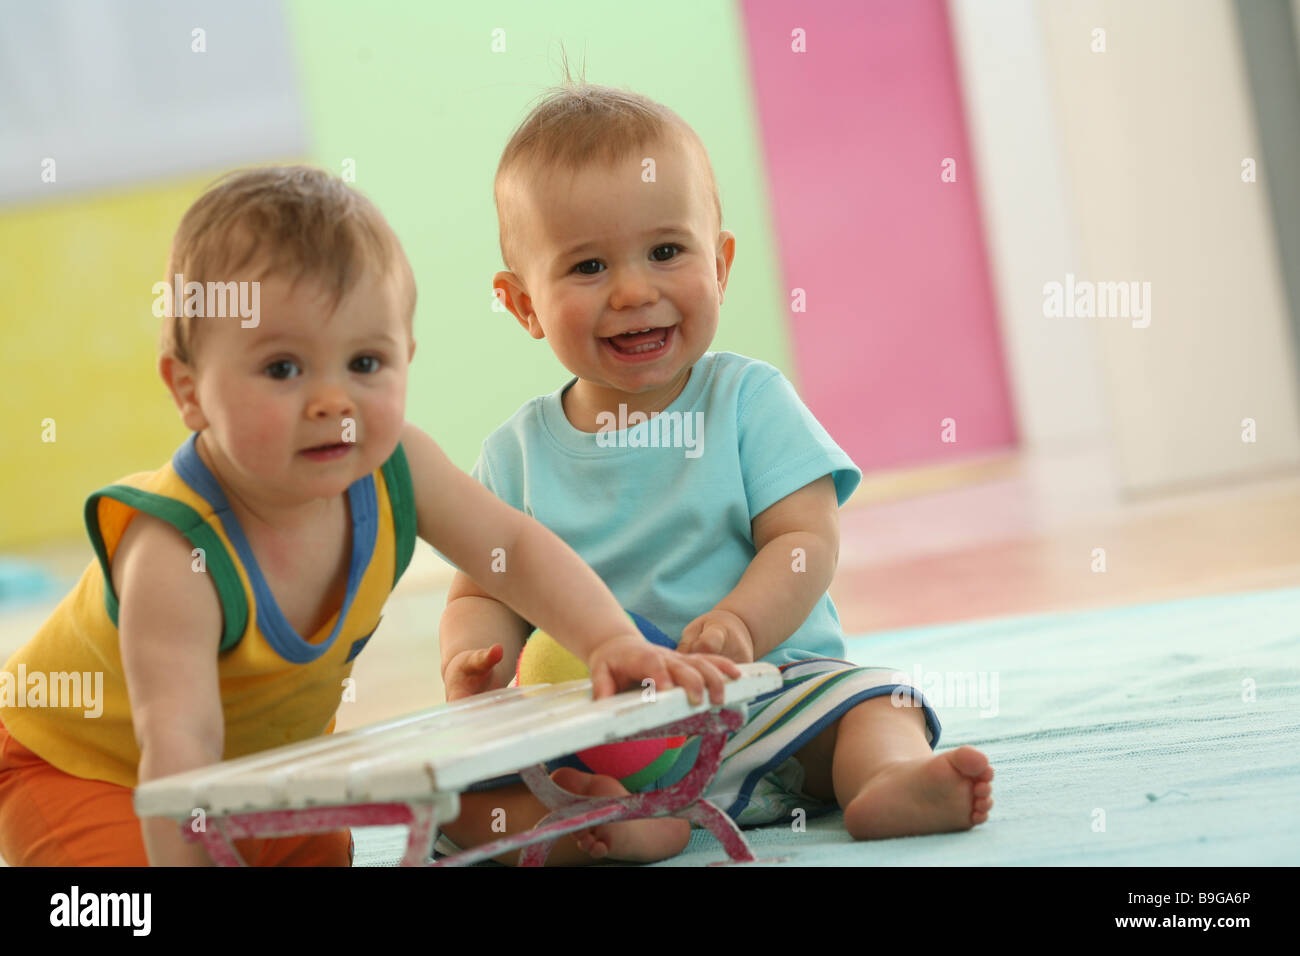 Babies sitting side by side plays smiling friends  10 months wakened alertly babies employing gaze camera development exploring Stock Photo